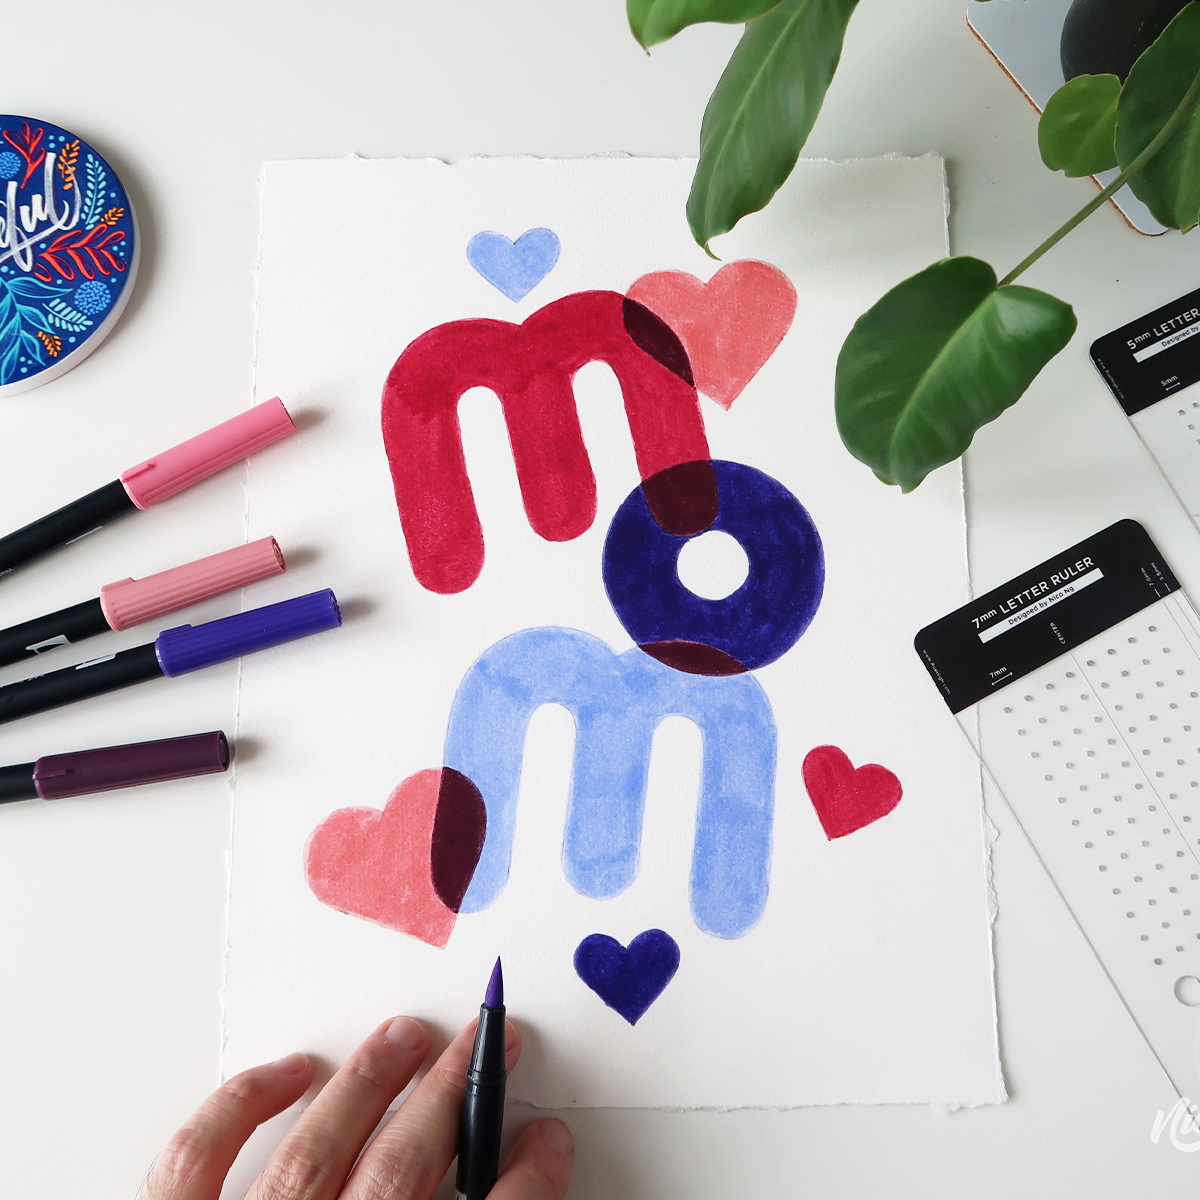 Overlapping Letters Handmade Mother’s Day Card Tutorial by Nico Ng